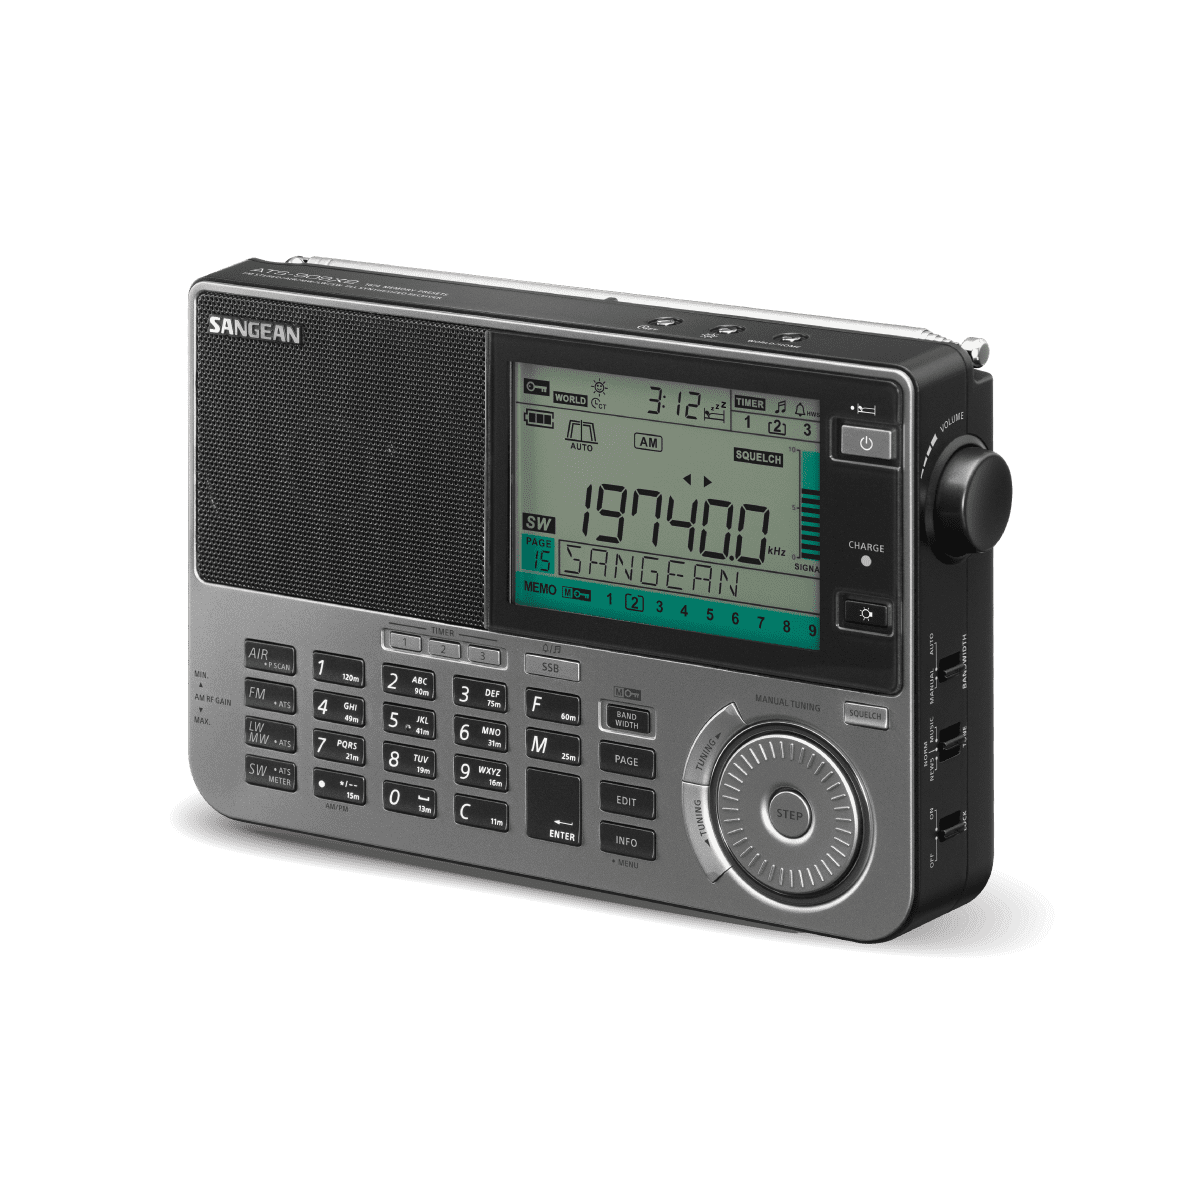 Sangean The Ultimate FM SW MW LW Air Multi-Band Receiver